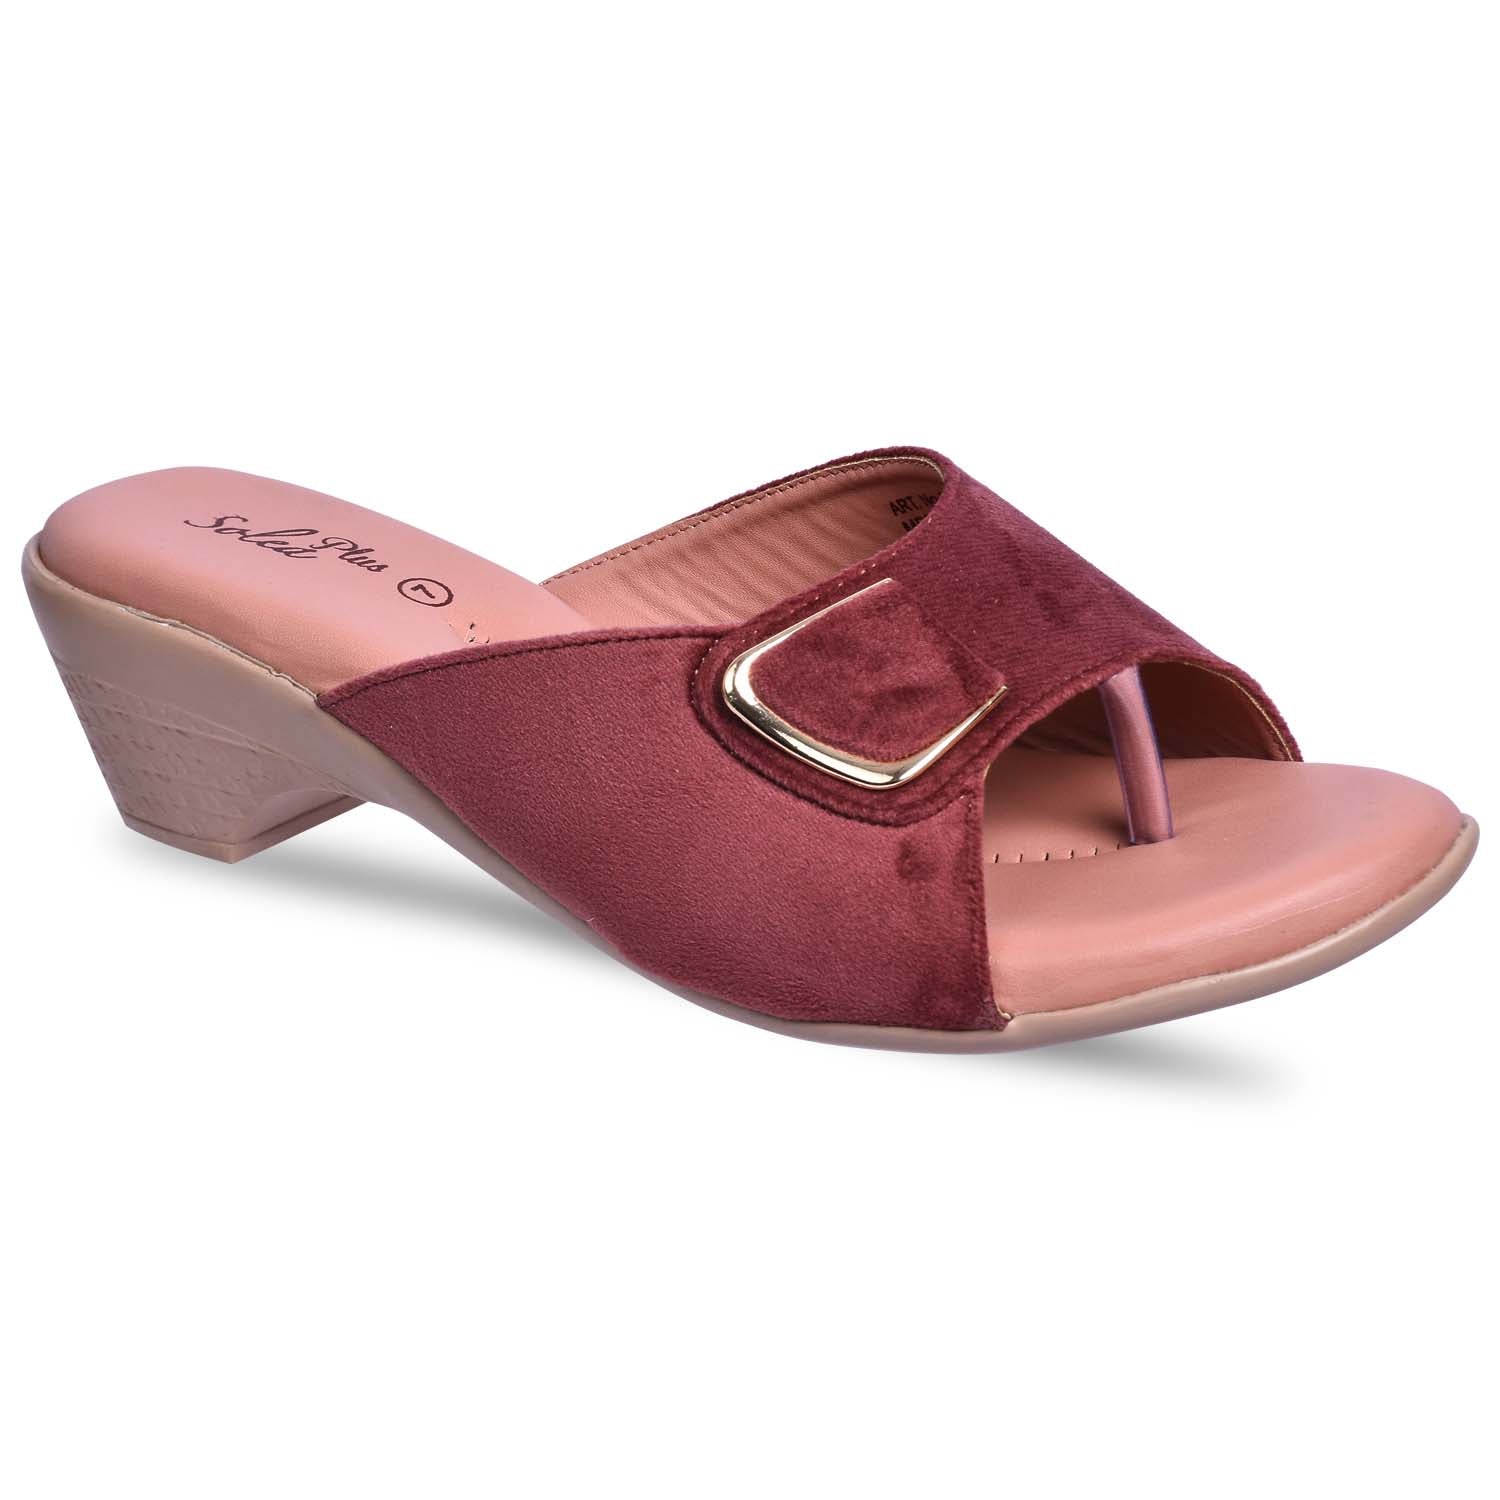 Paragon R1019L Women Sandals | Casual &amp; Formal Sandals | Stylish, Comfortable &amp; Durable | For Daily &amp; Occasion Wear